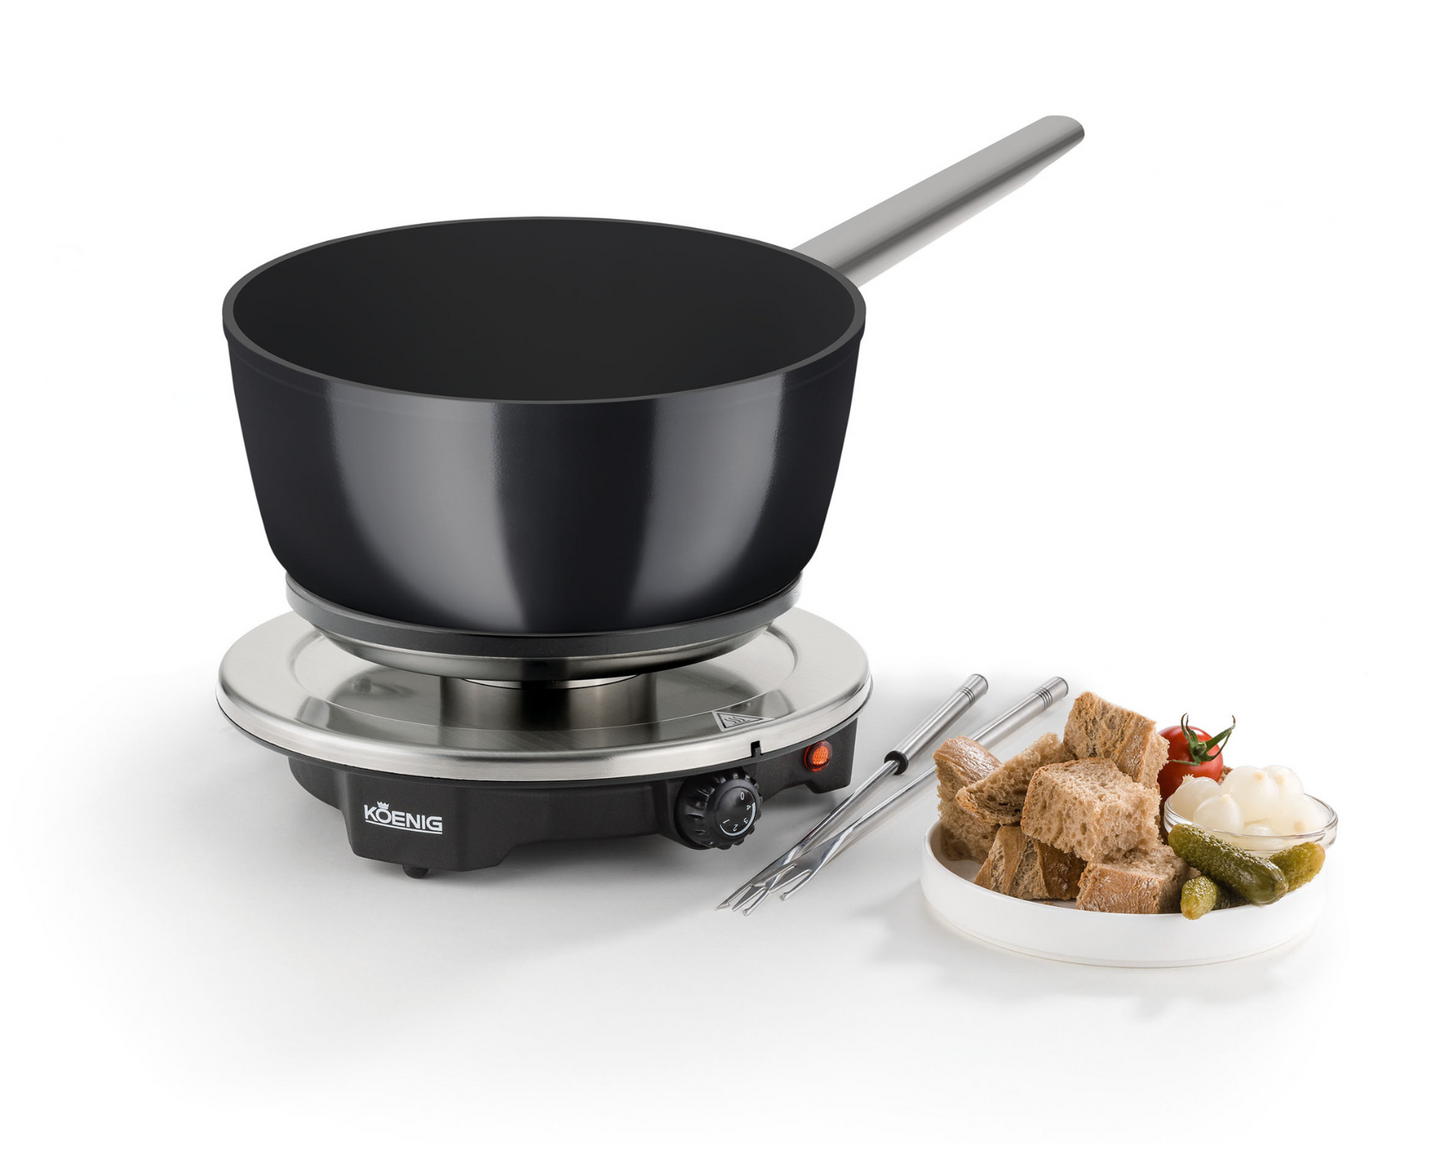 Fondue-Set One for All, kitchen-more.ch